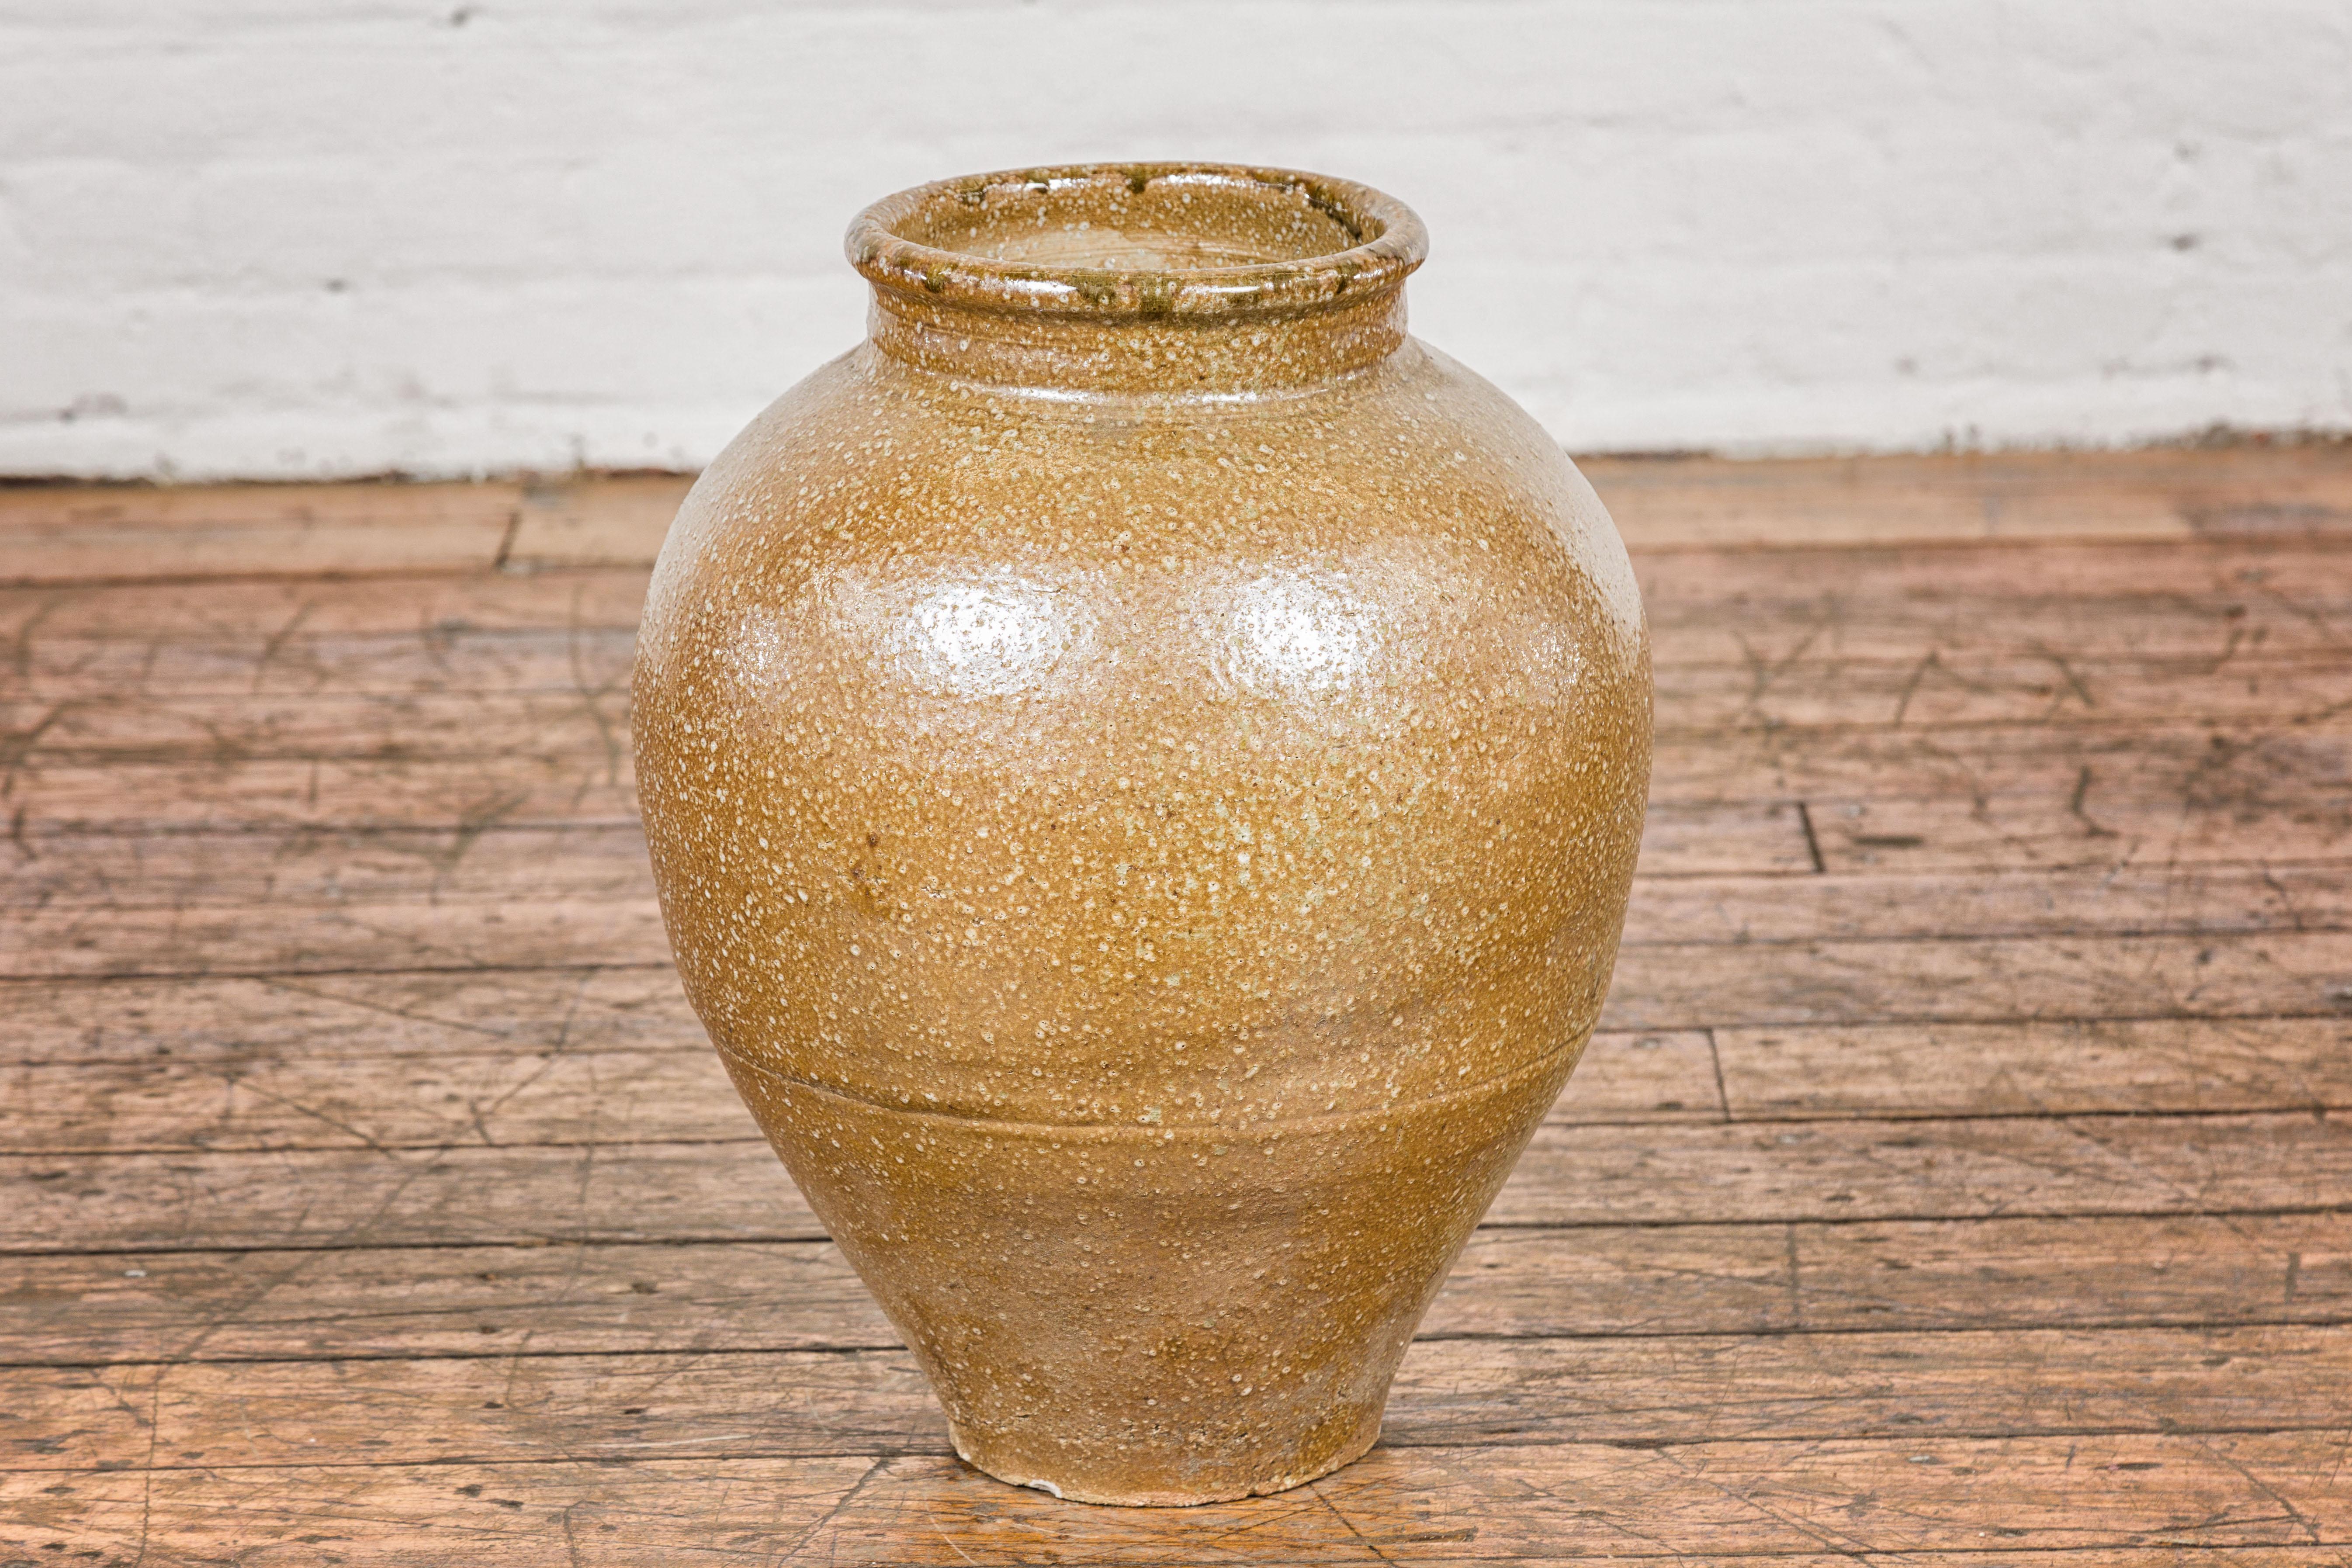 Japanese Taishō Period Two-Tone Sand Glaze Vase with Textured Finish, circa 1900 For Sale 4